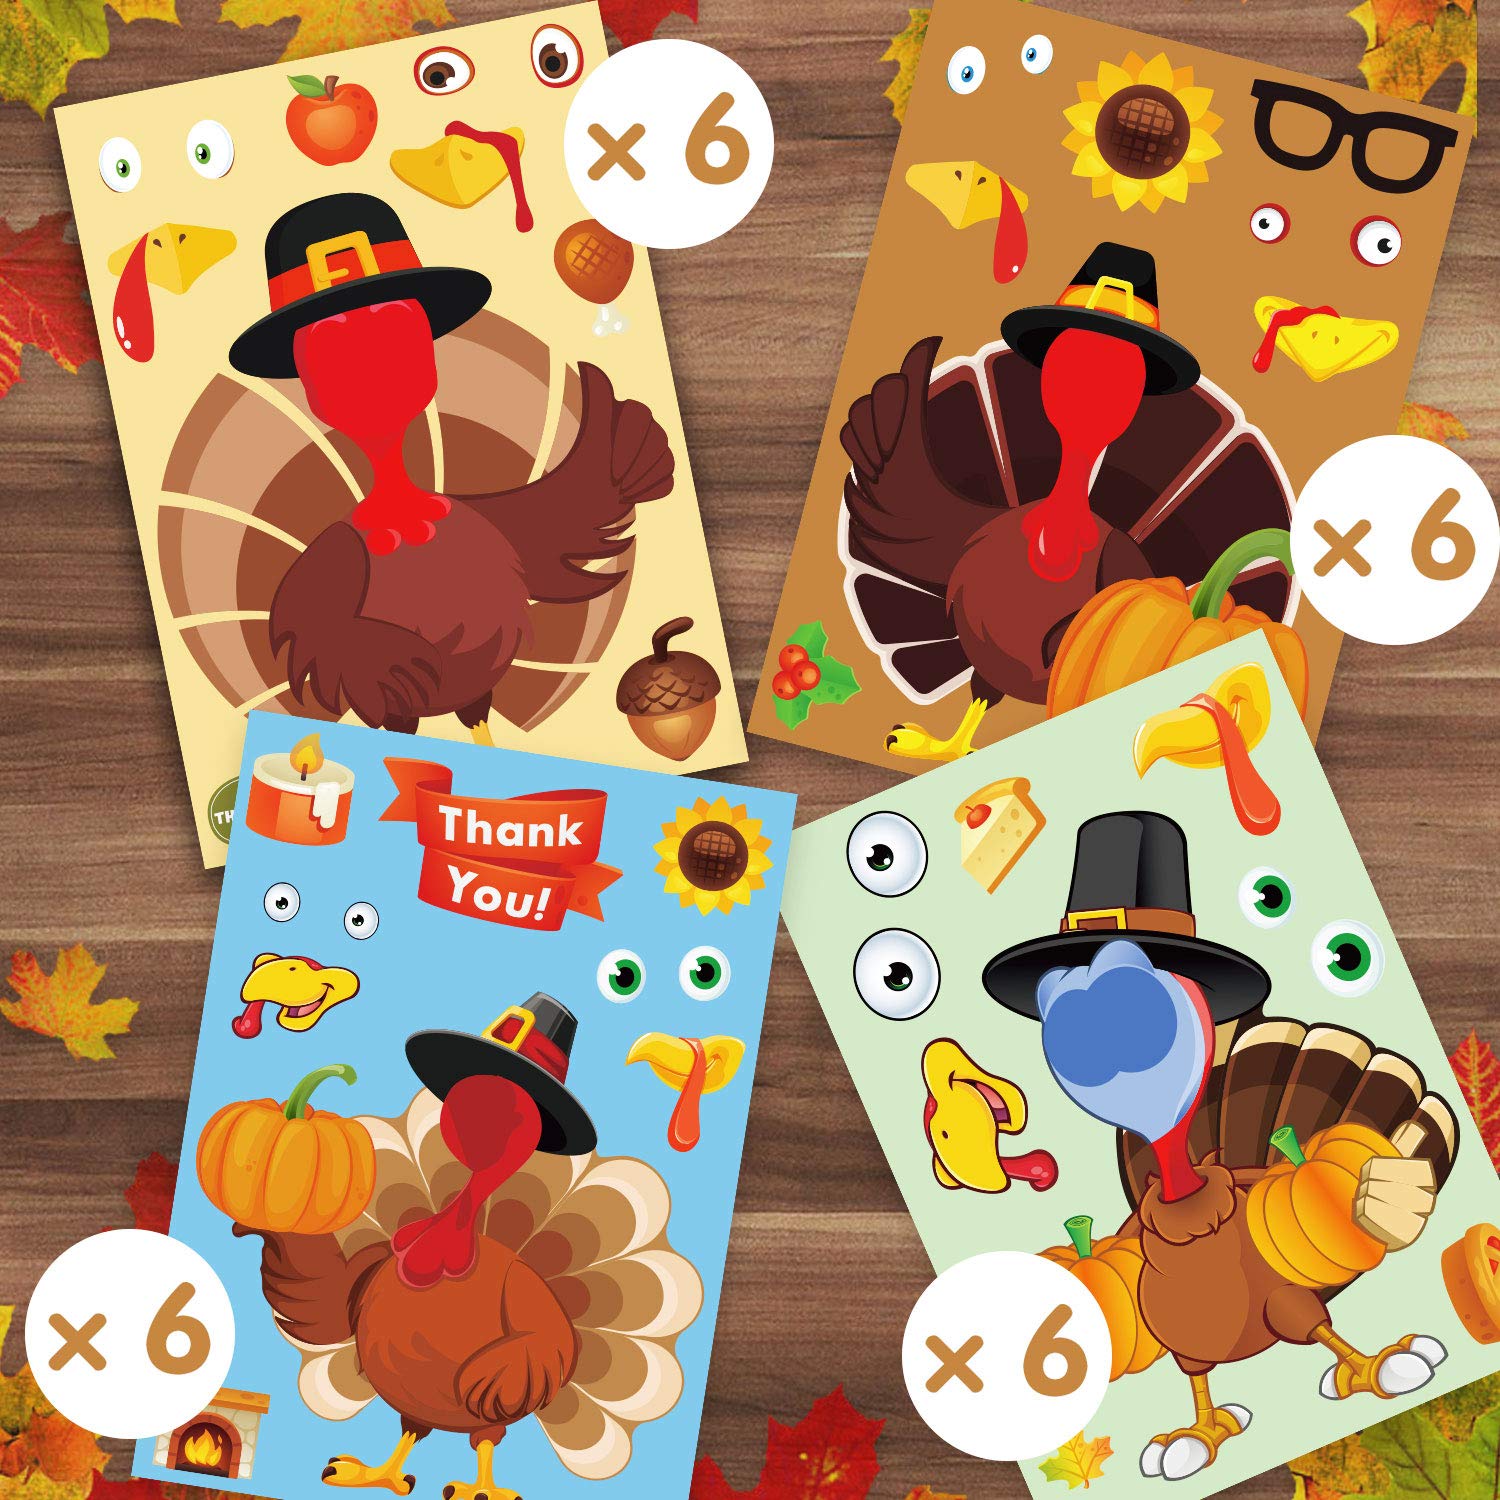 Funnlot Thanksgiving Party Games for Kids,24PCS Thanksgiving Activities for Toddlers Make A Turkey Stickers Thanksgiving Games Supplies Decorations Turkey Stickers